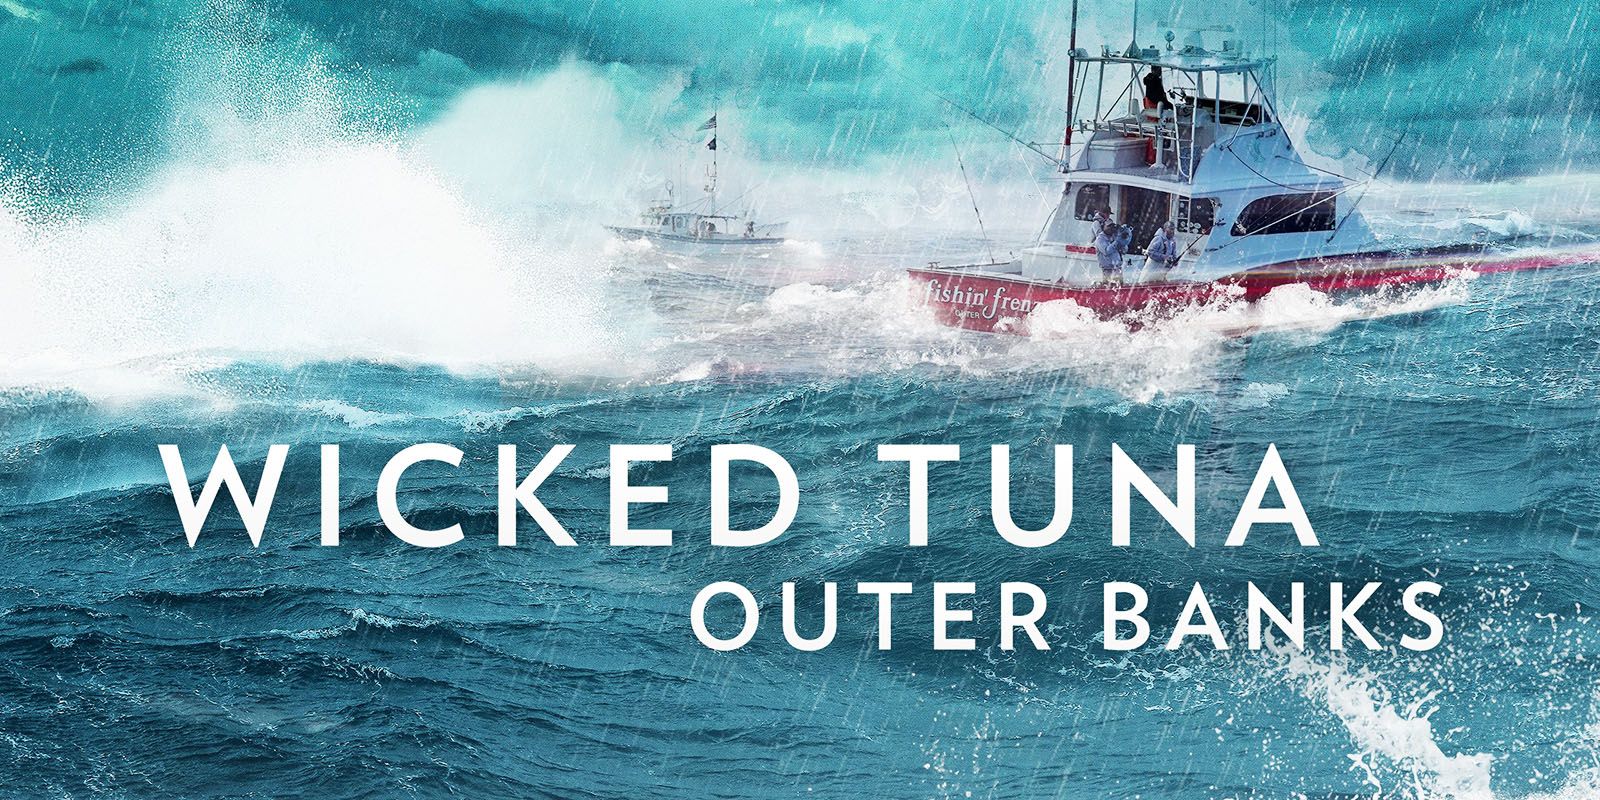 Wicked Tuna Outer Banks